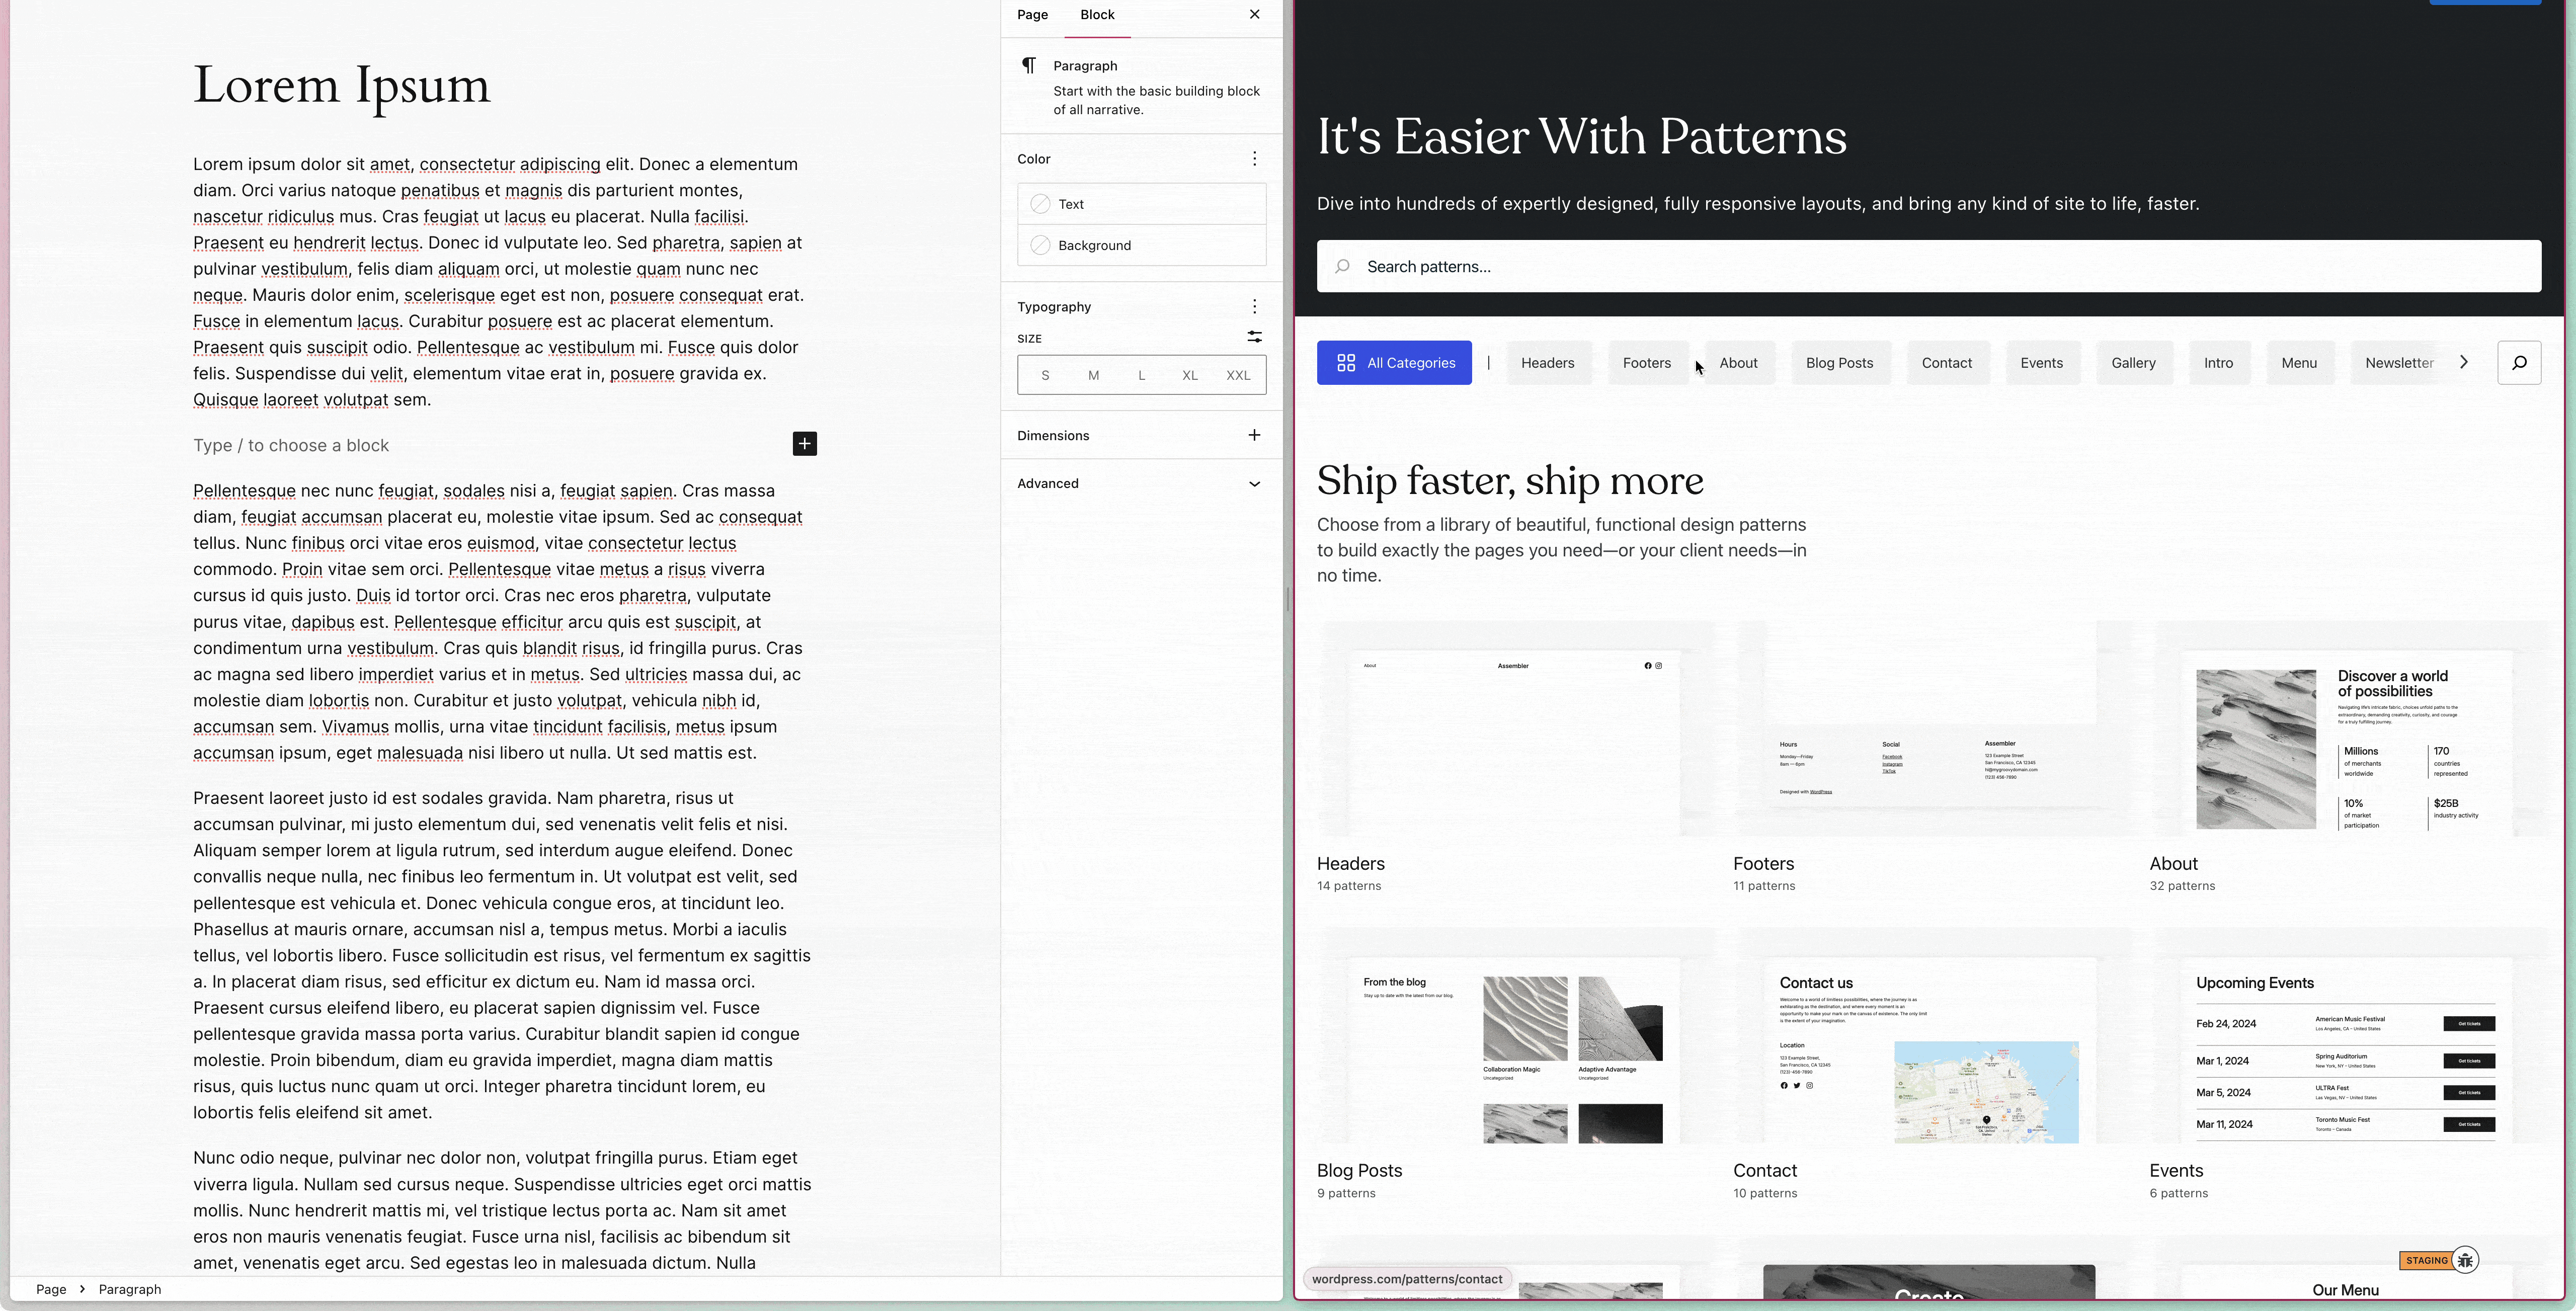 gif showing how to add a pattern from WordPress.com's Pattern Library to a WordPress page